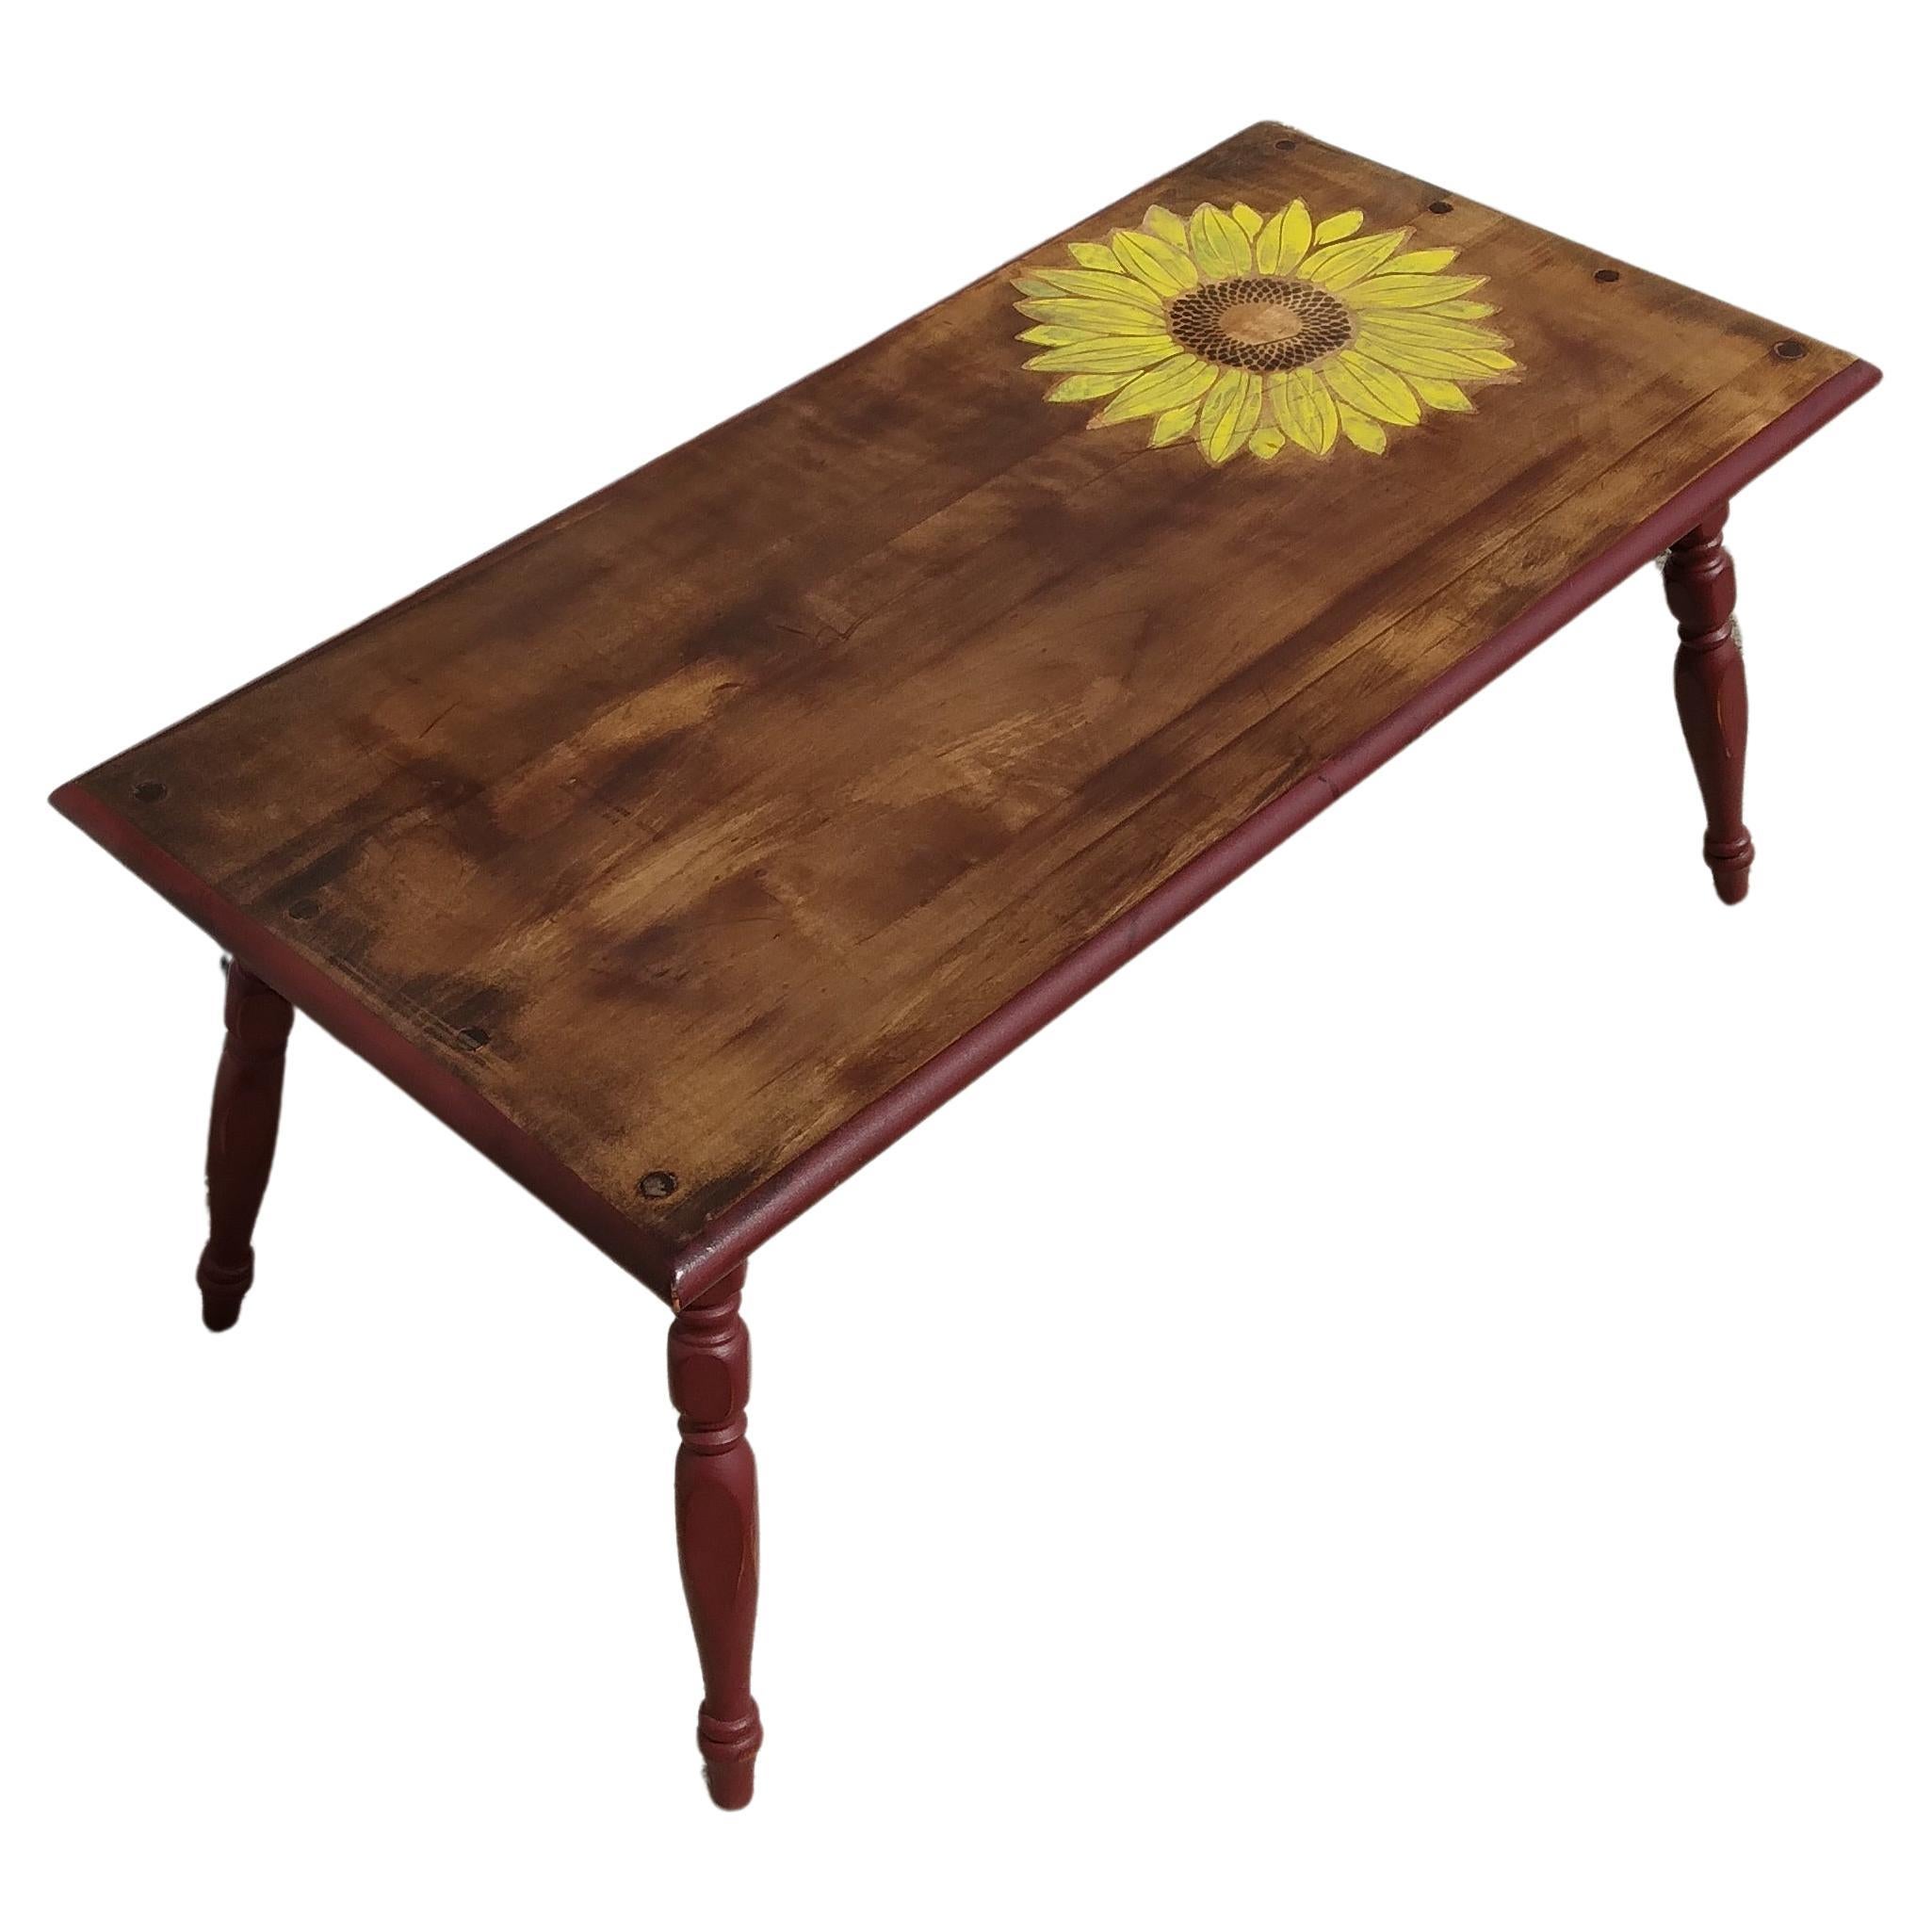 Vintage Accent Table Plant Stand with Sunflower For Sale